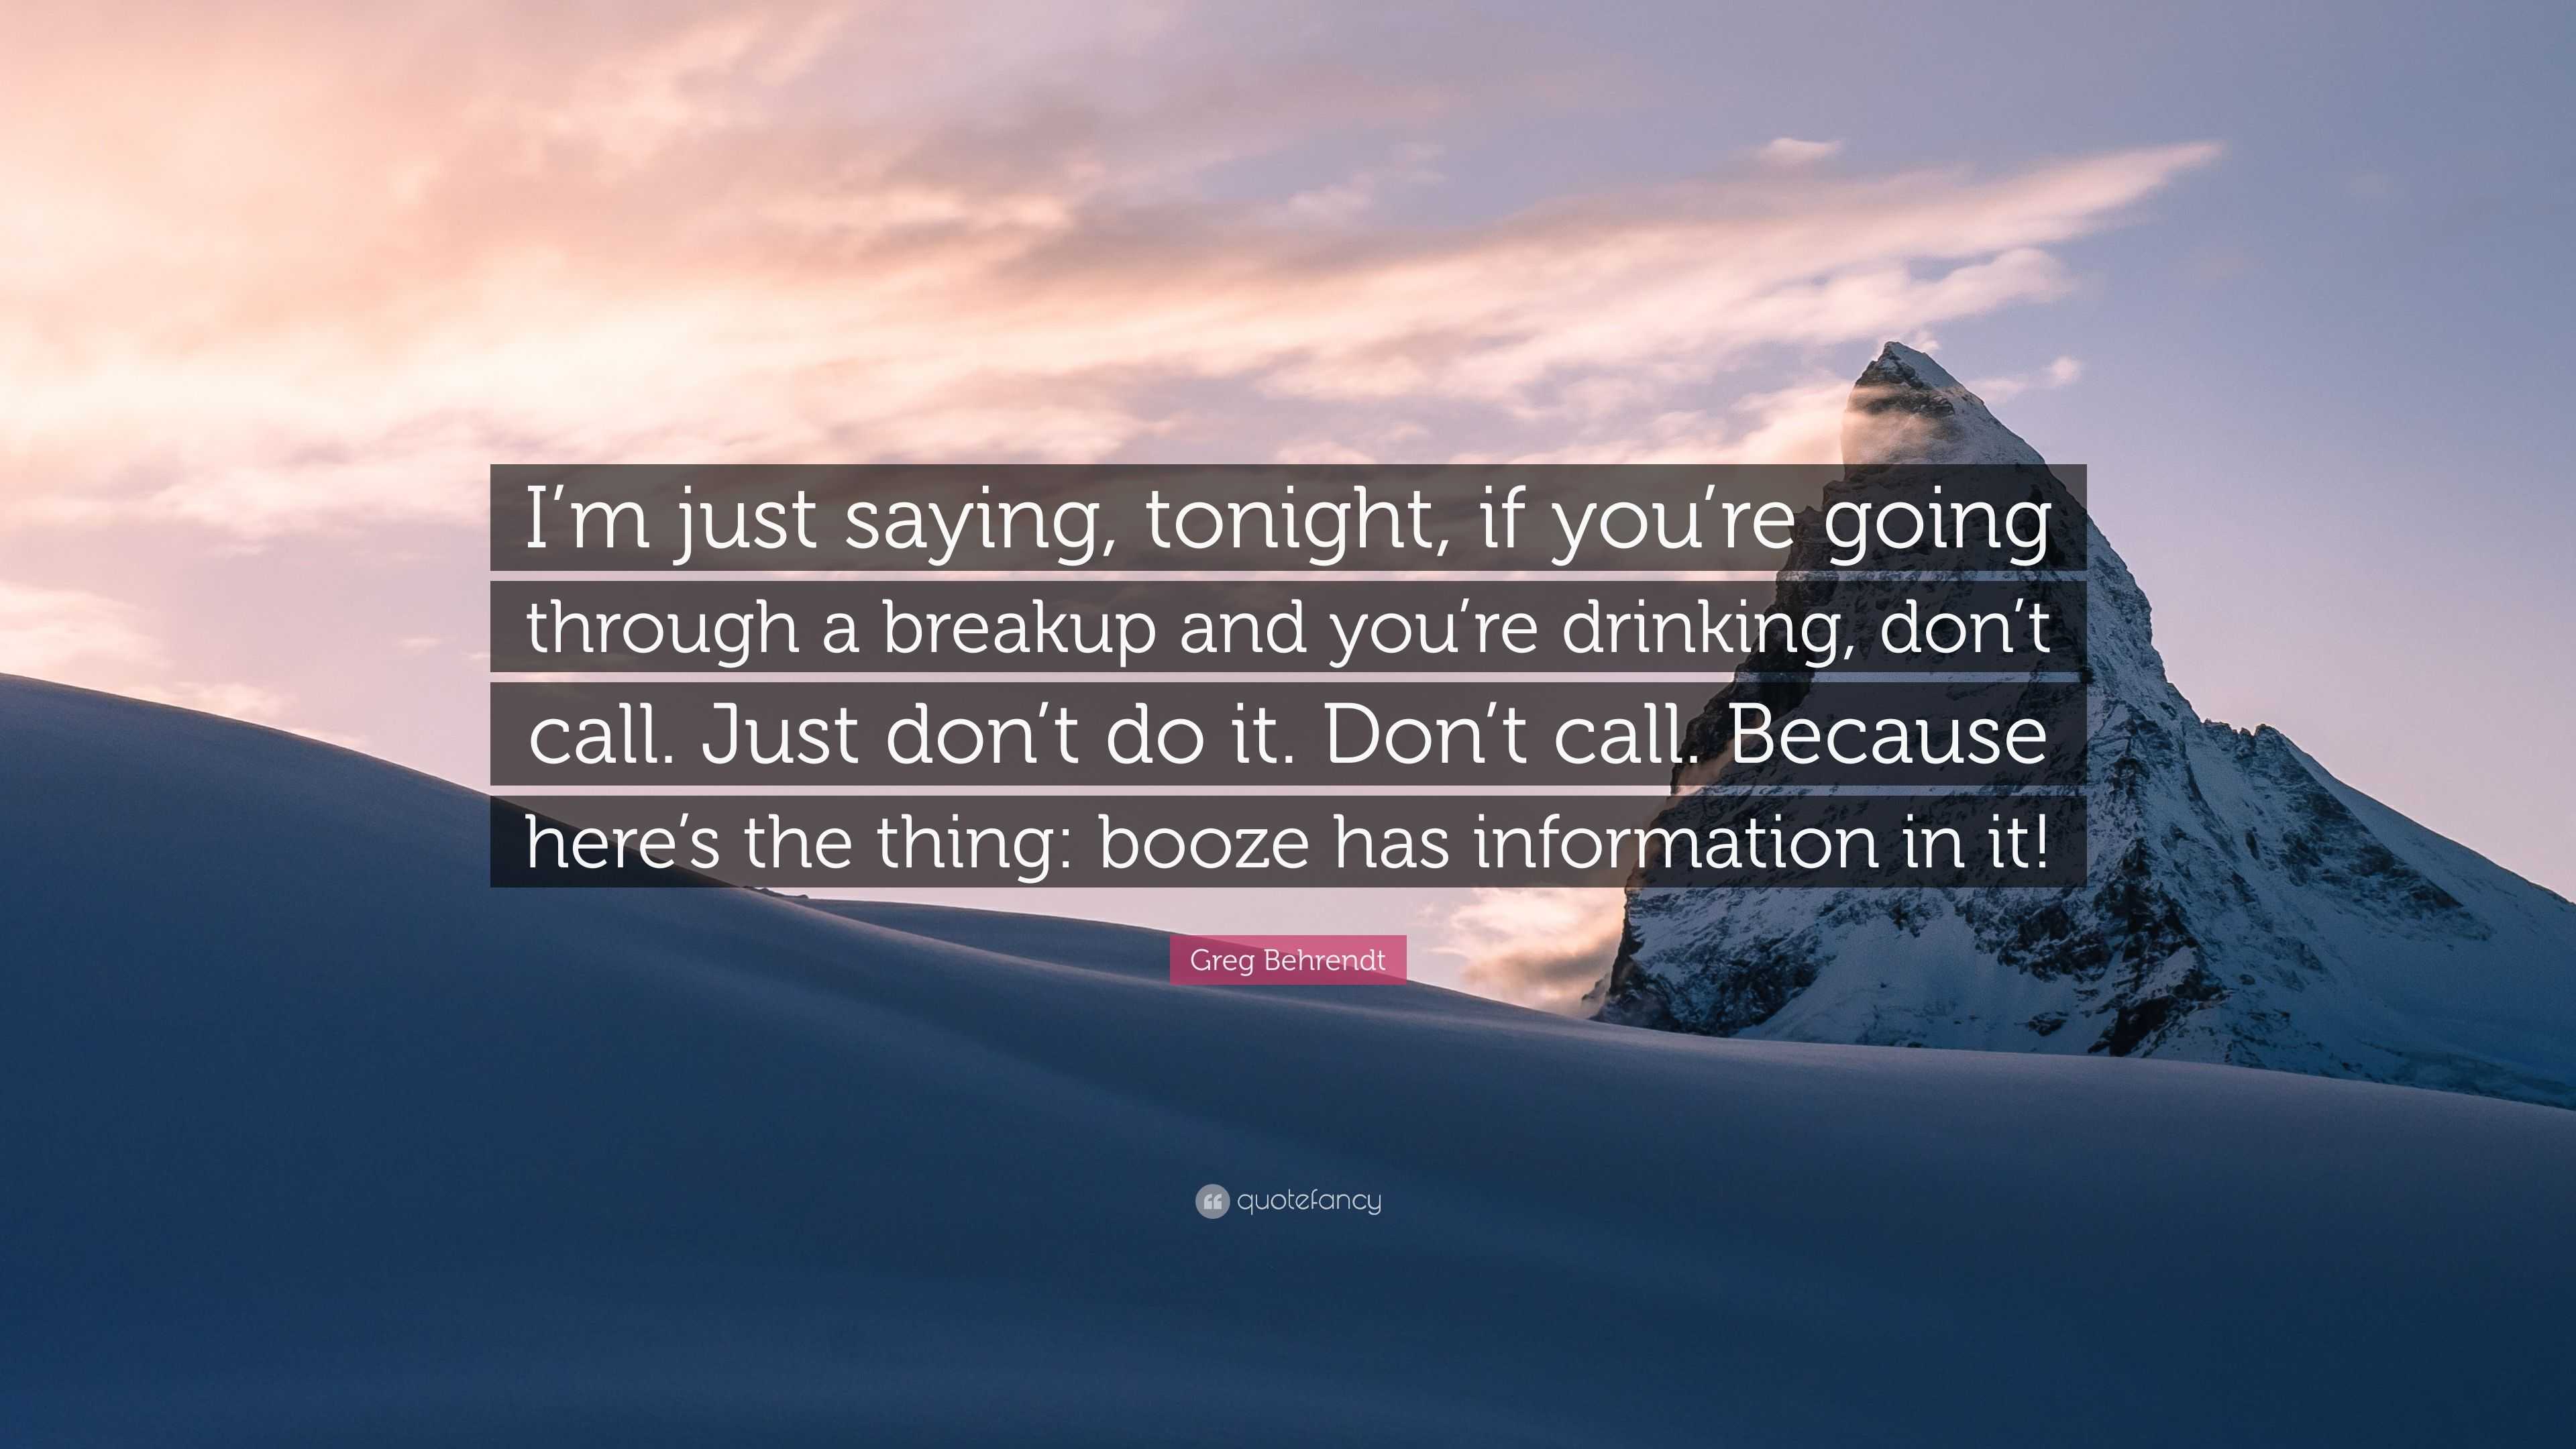 Greg Behrendt Quote: “I'm just saying, tonight, if you're going